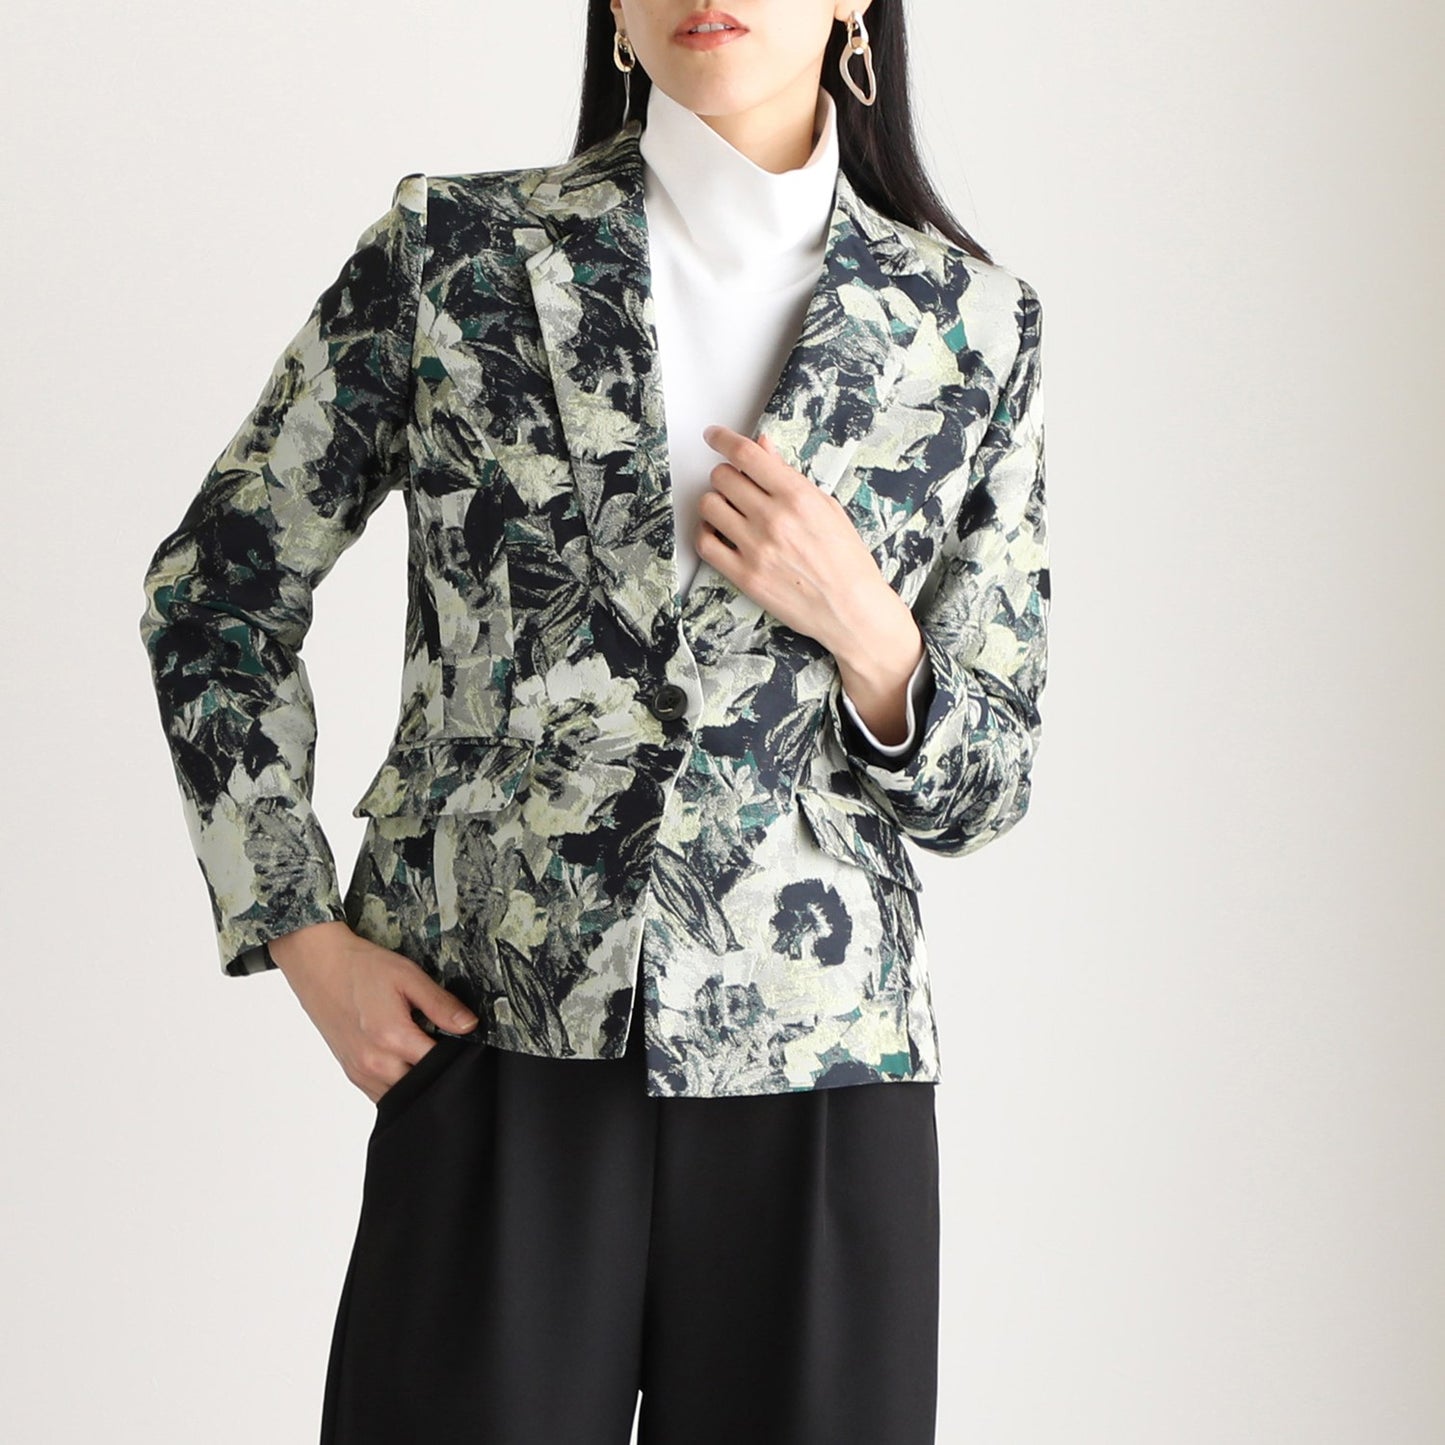 Tailored Jacket in Navy and Sage Floral